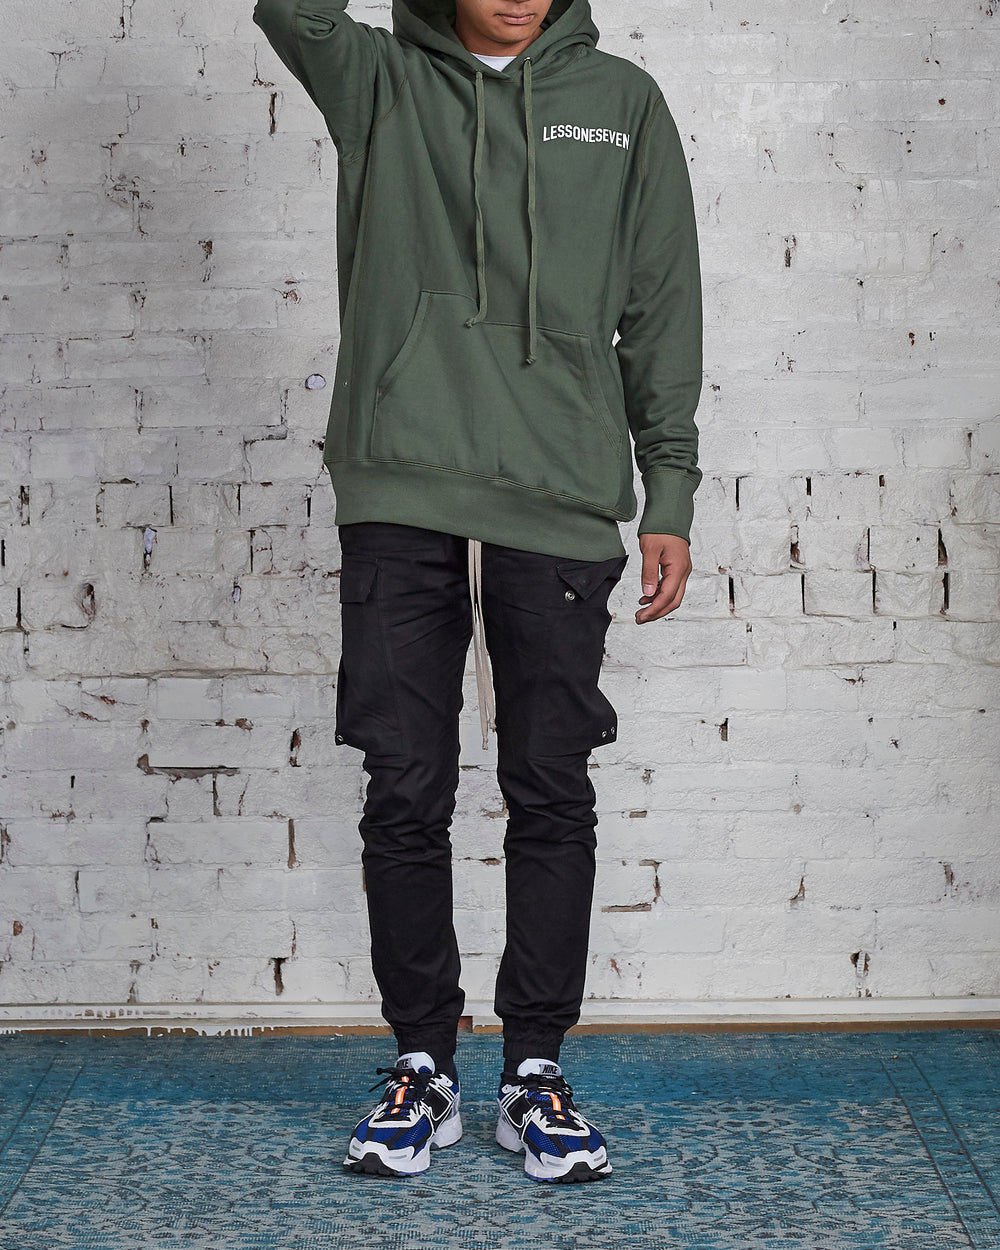 LESS17 Wavy Hoodie Olive-LESS 17